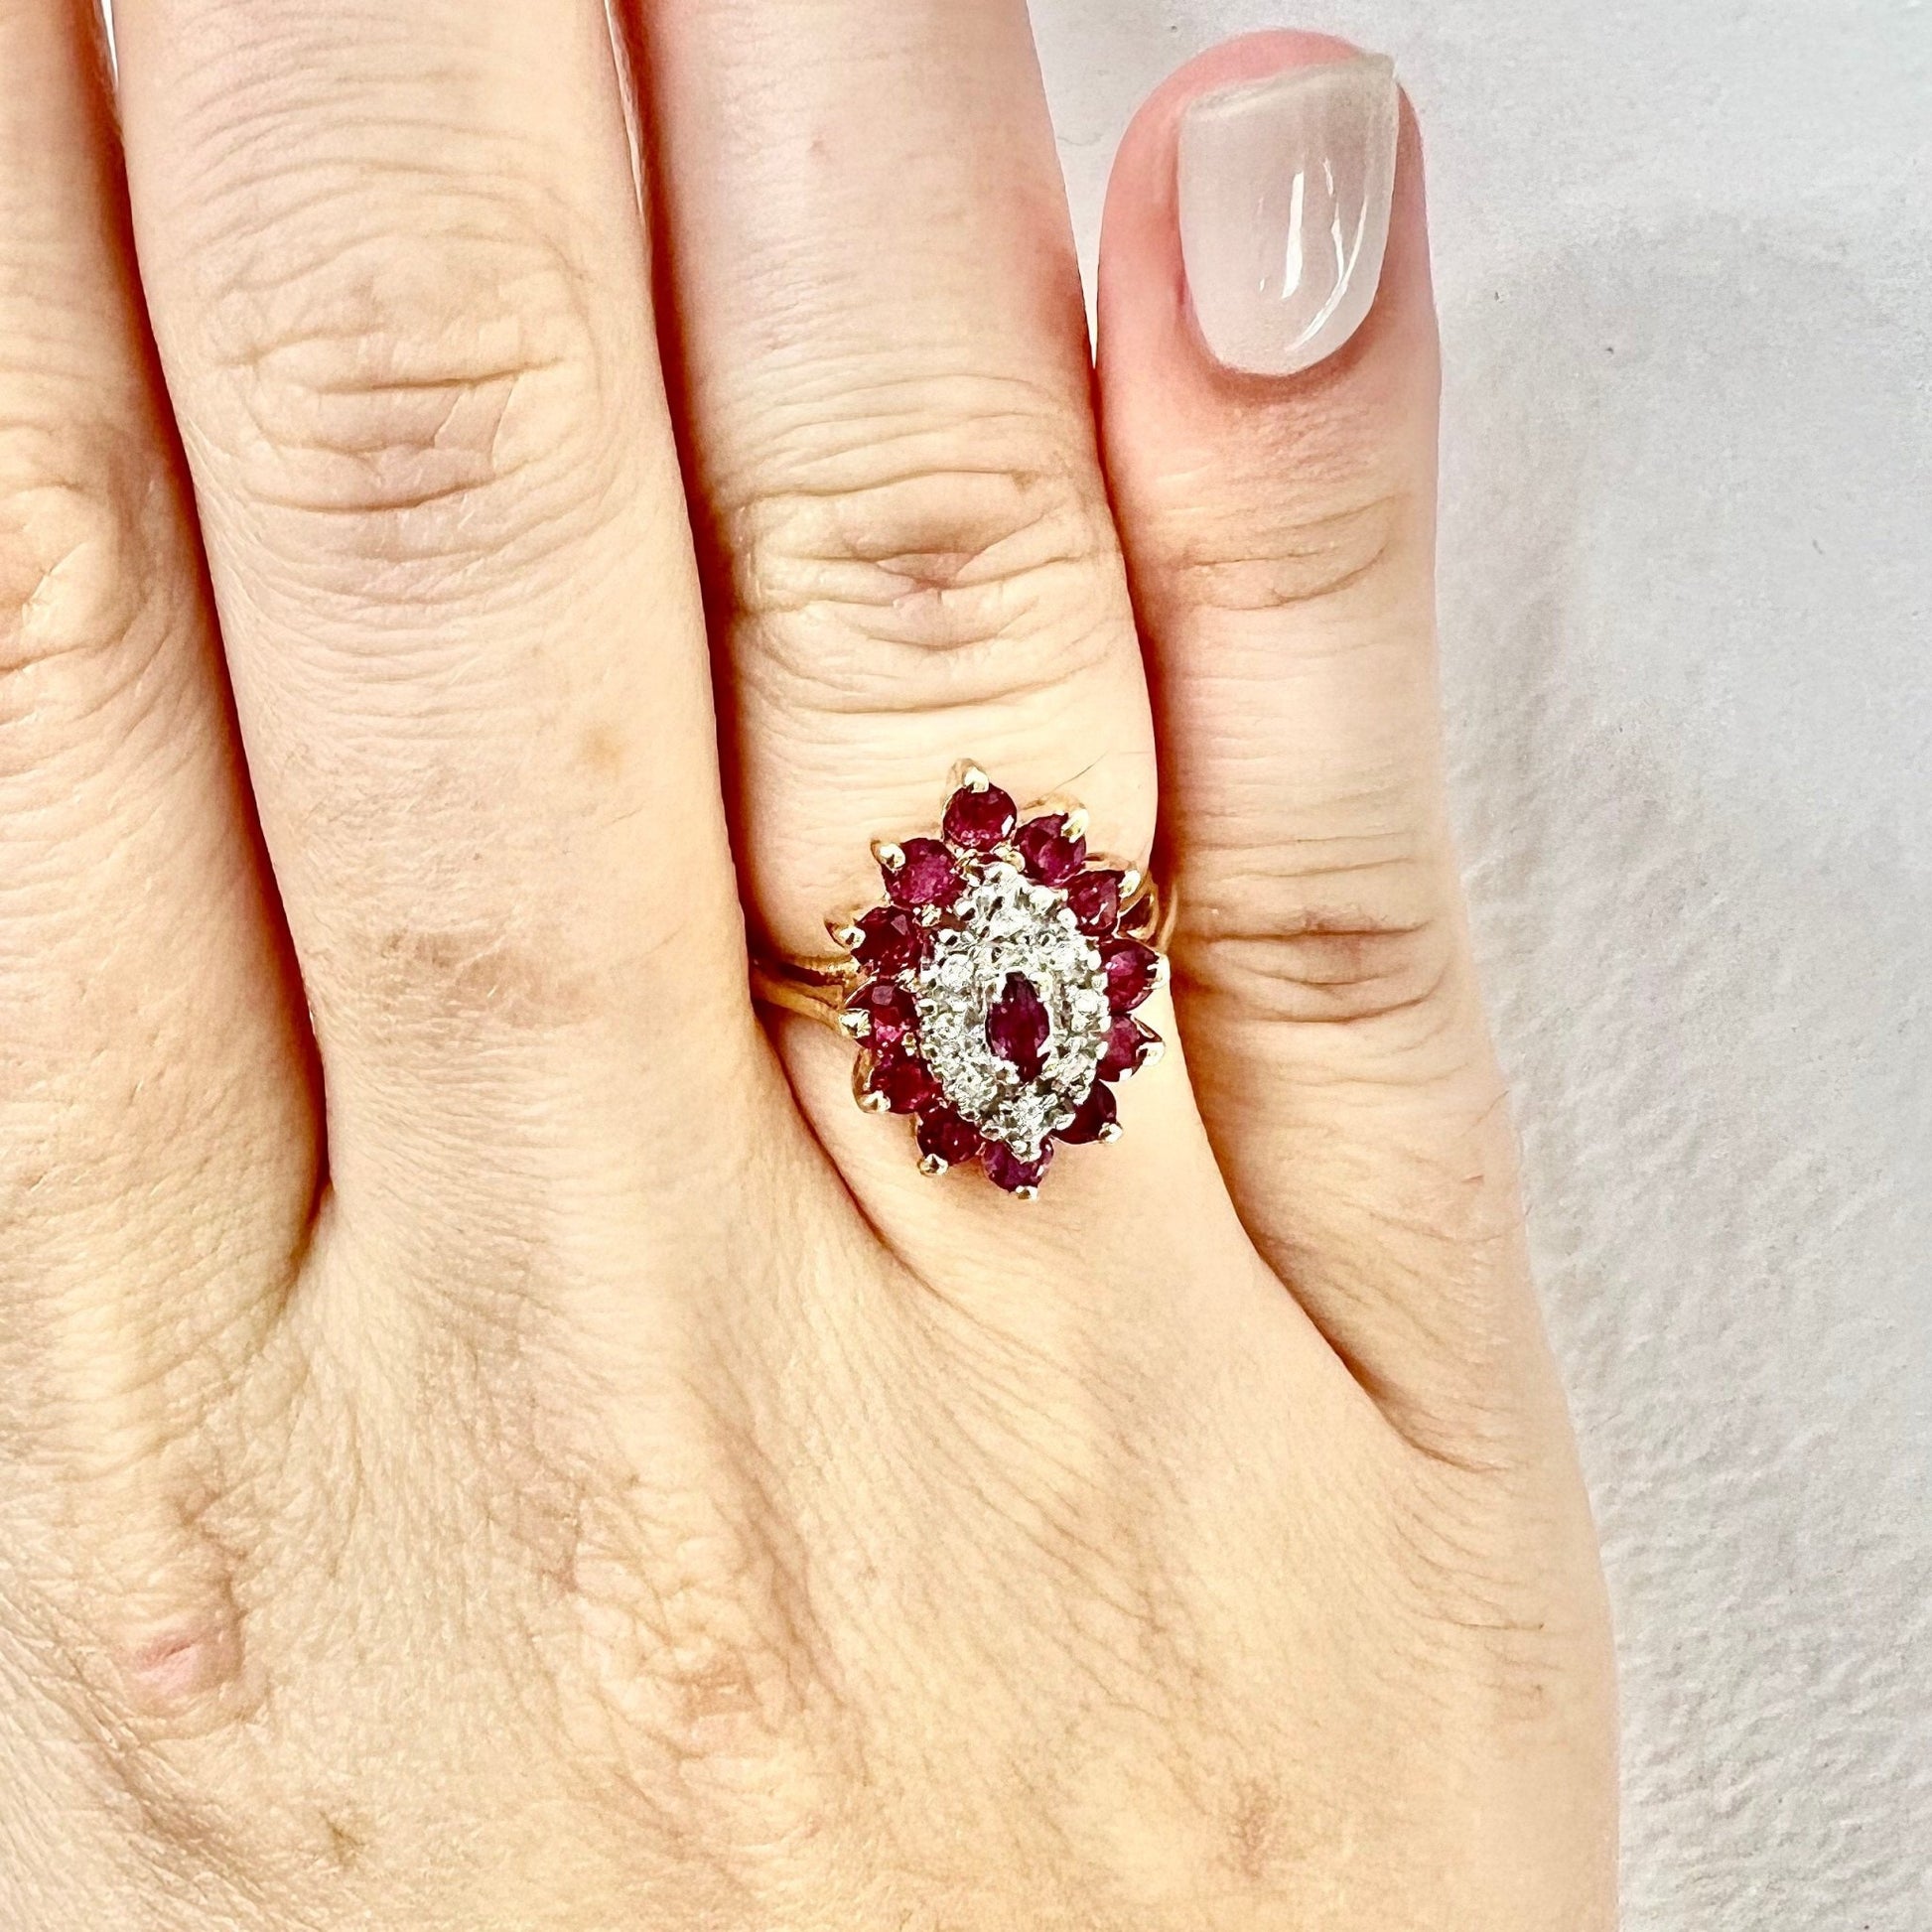 Vintage 10K Natural Ruby & Diamond Halo Ring - 2 Tone Gold Ruby Cocktail Ring - April July Birthstone - Birthday Gift For Her